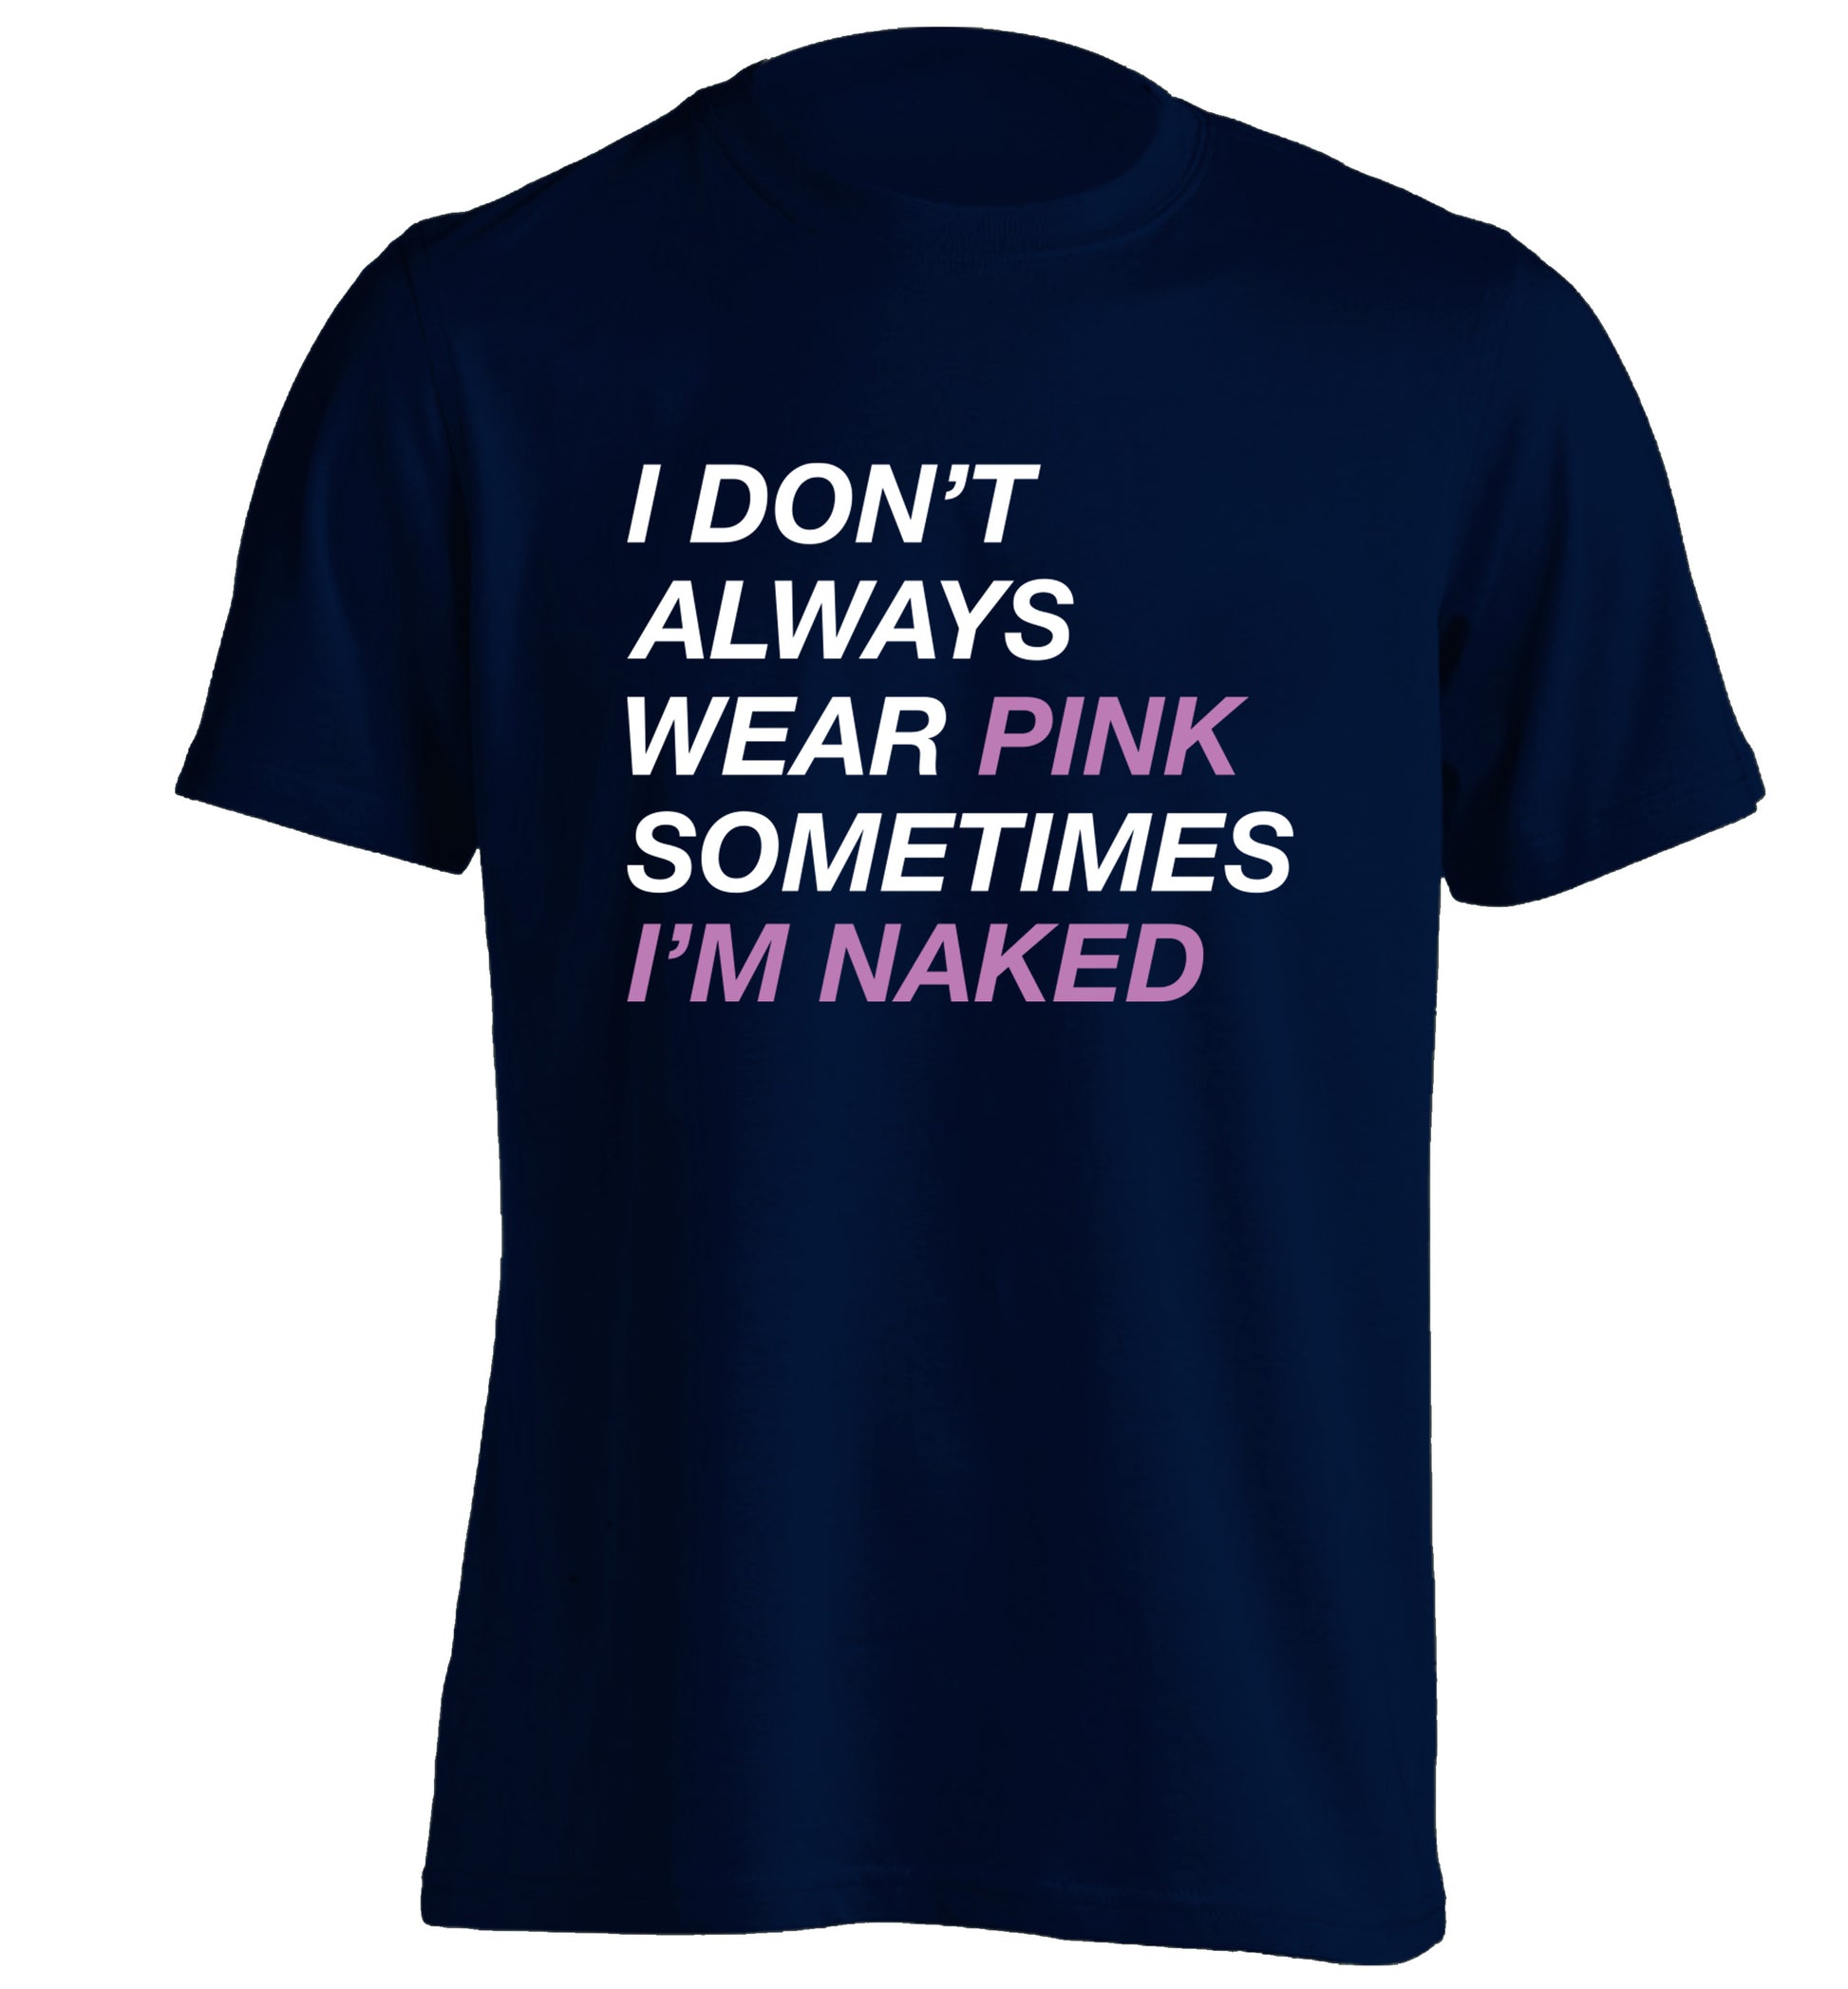 I don't always wear pink sometimes I'm naked adults unisex navy Tshirt 2XL